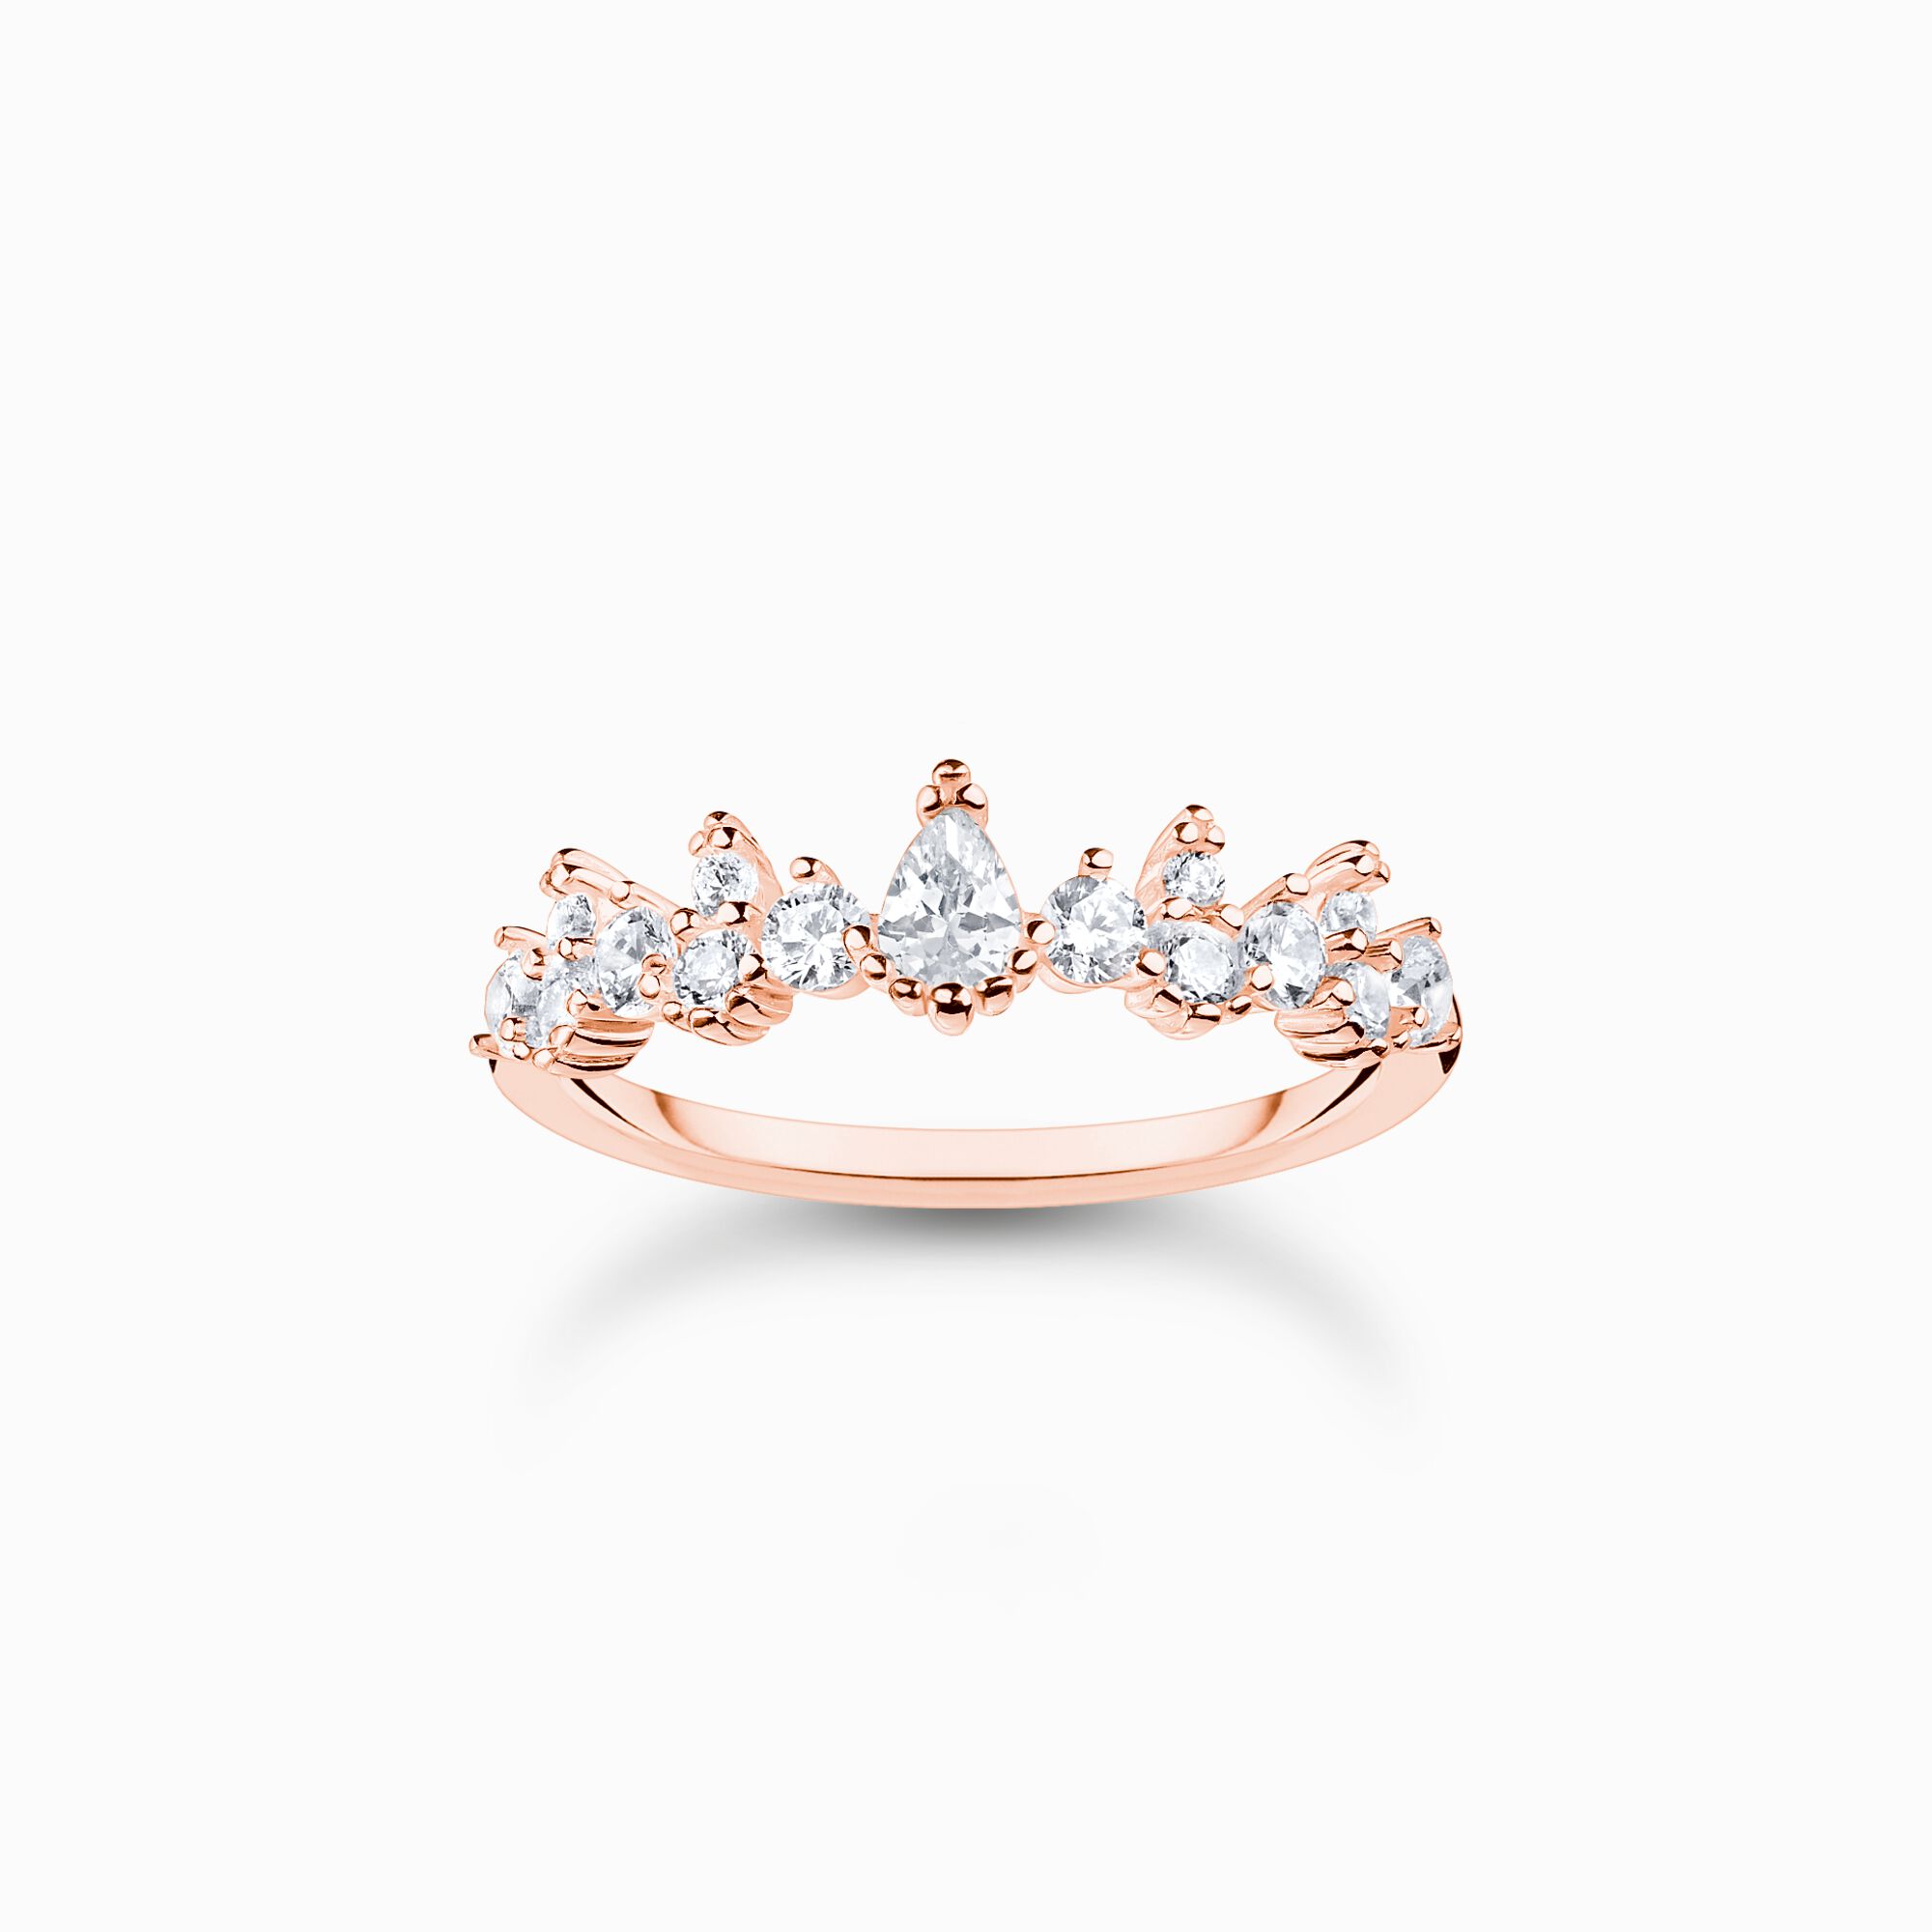 Automatisch Komkommer extreem Ring with zirconia stones, rose gold plating | THOMAS SABO